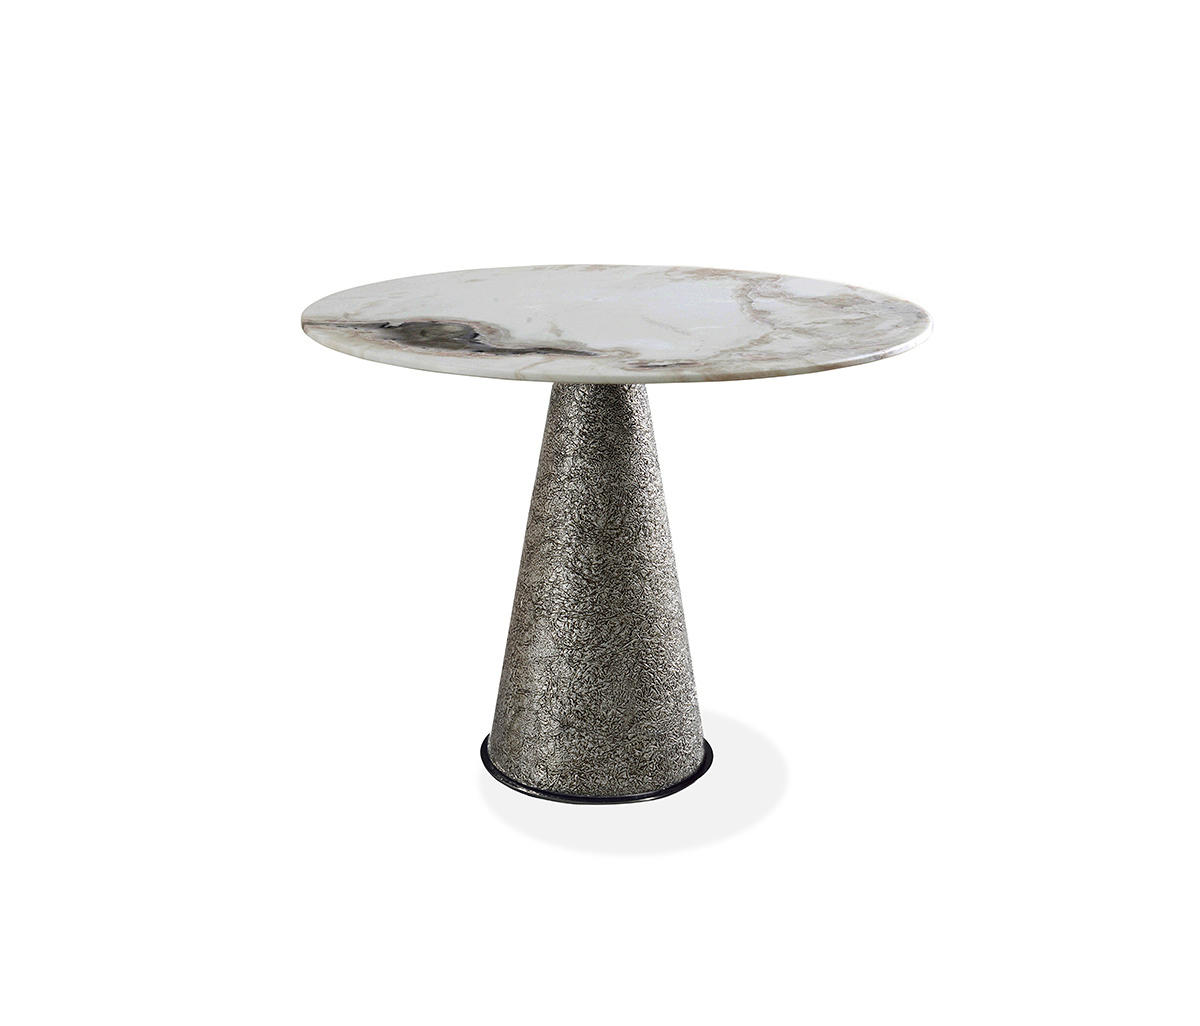 CHEOPE - Side tables from HESSENTIA | Cornelio Cappellini | Architonic